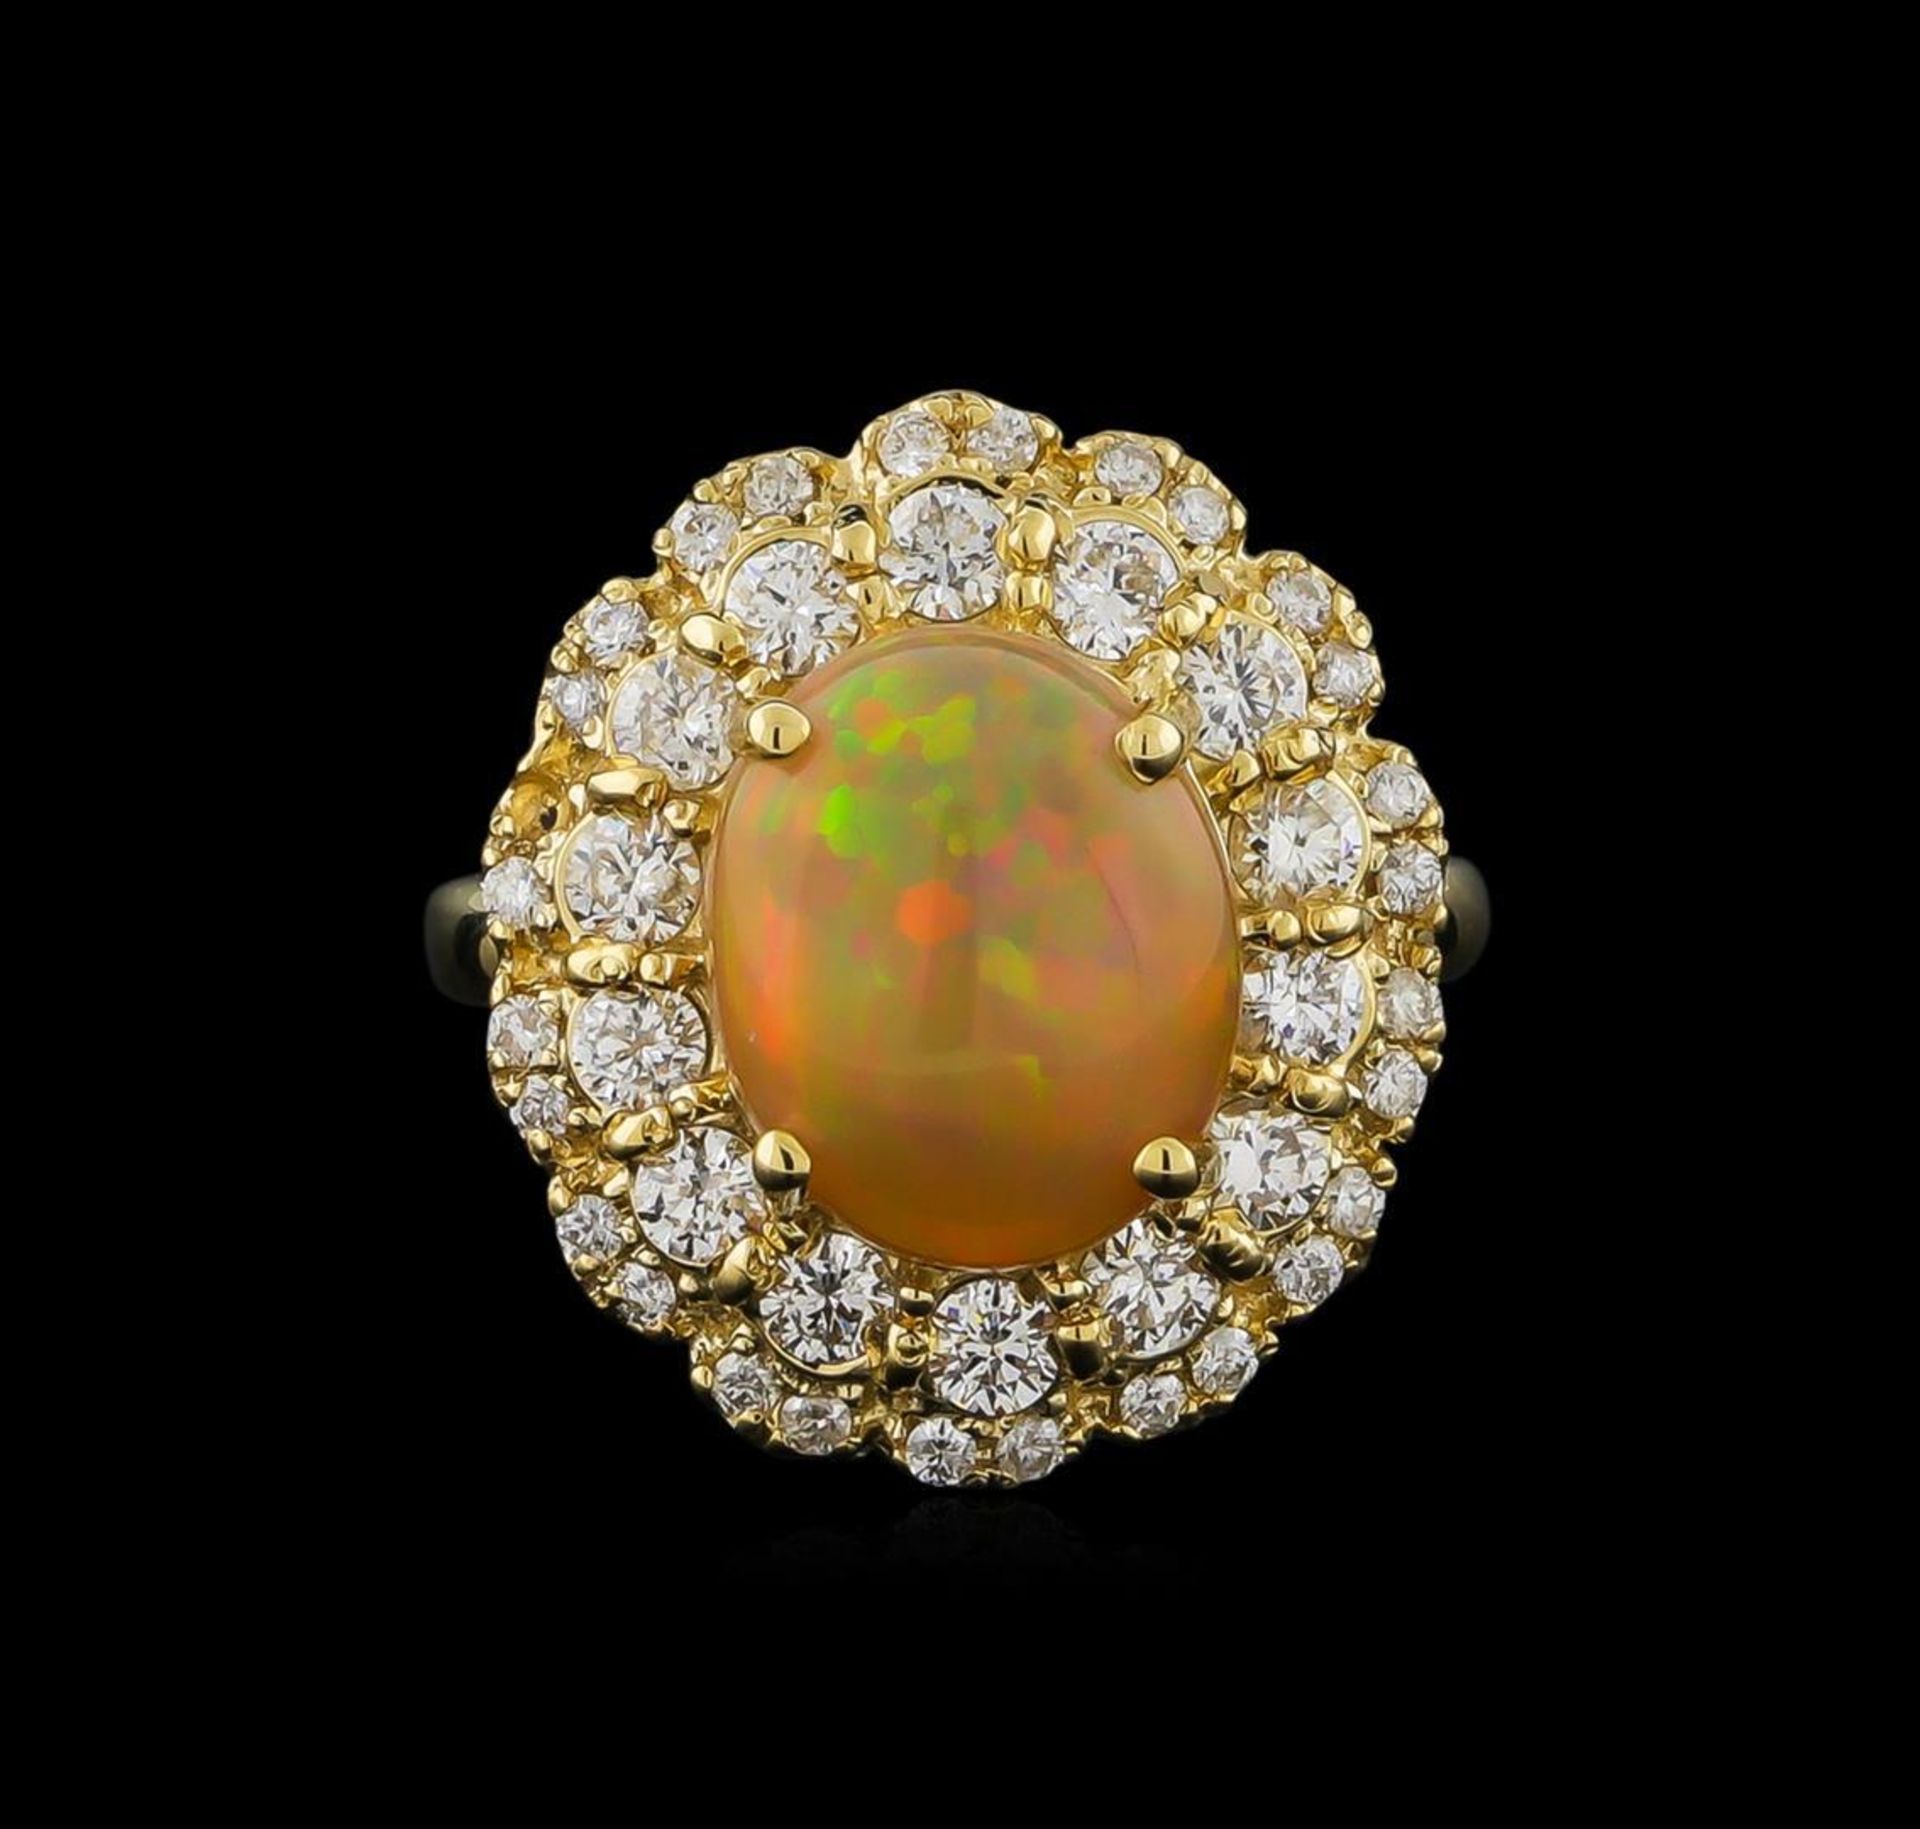 2.75 ctw Opal and Diamond Ring - 14KT Yellow Gold - Image 2 of 5